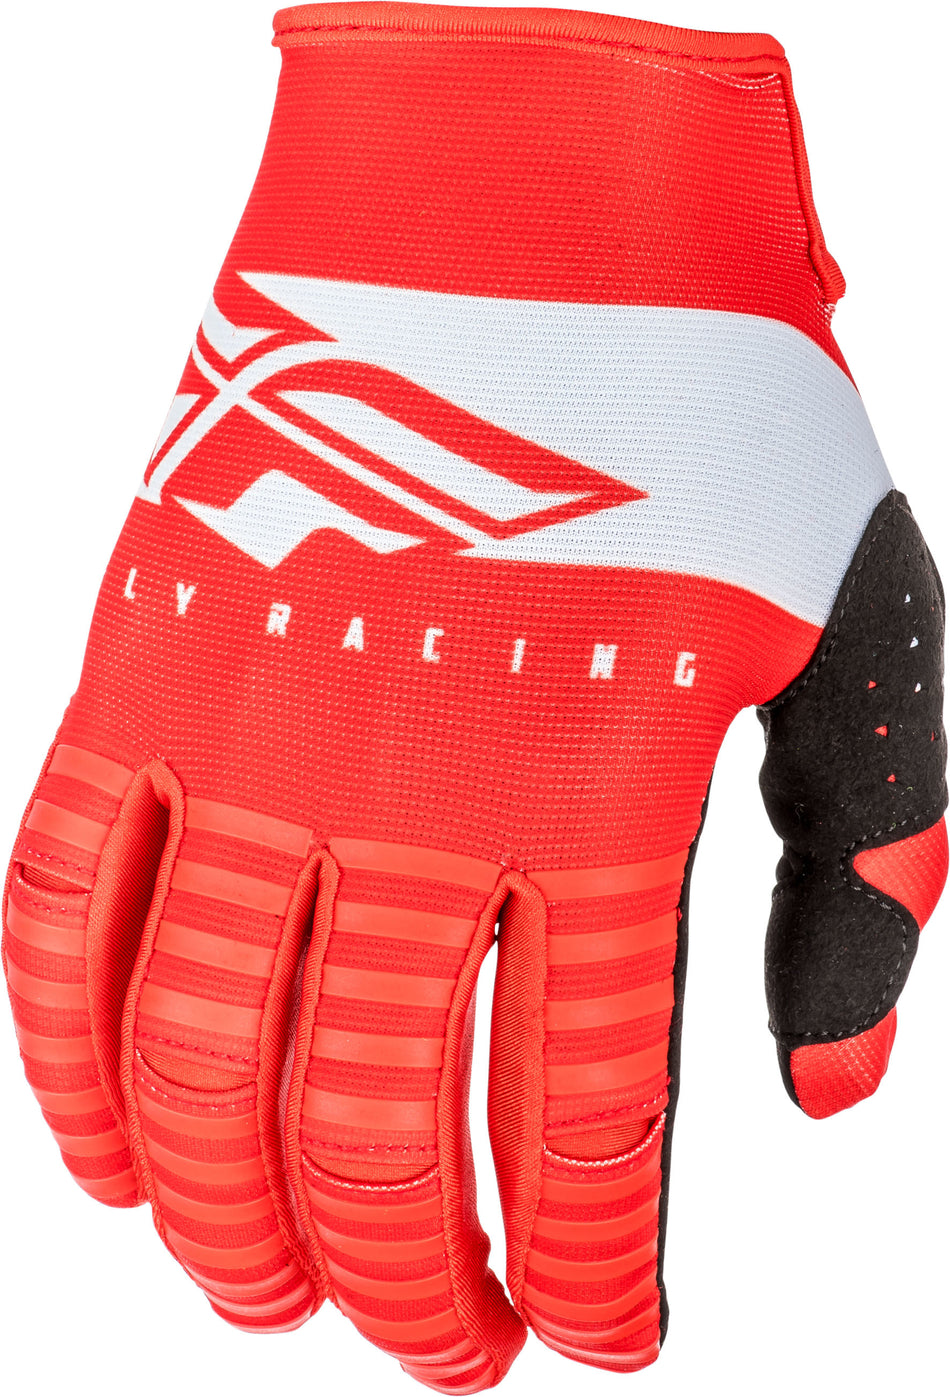 FLY RACING Kinetic Shield Gloves Red/White Sz 05 372-41205